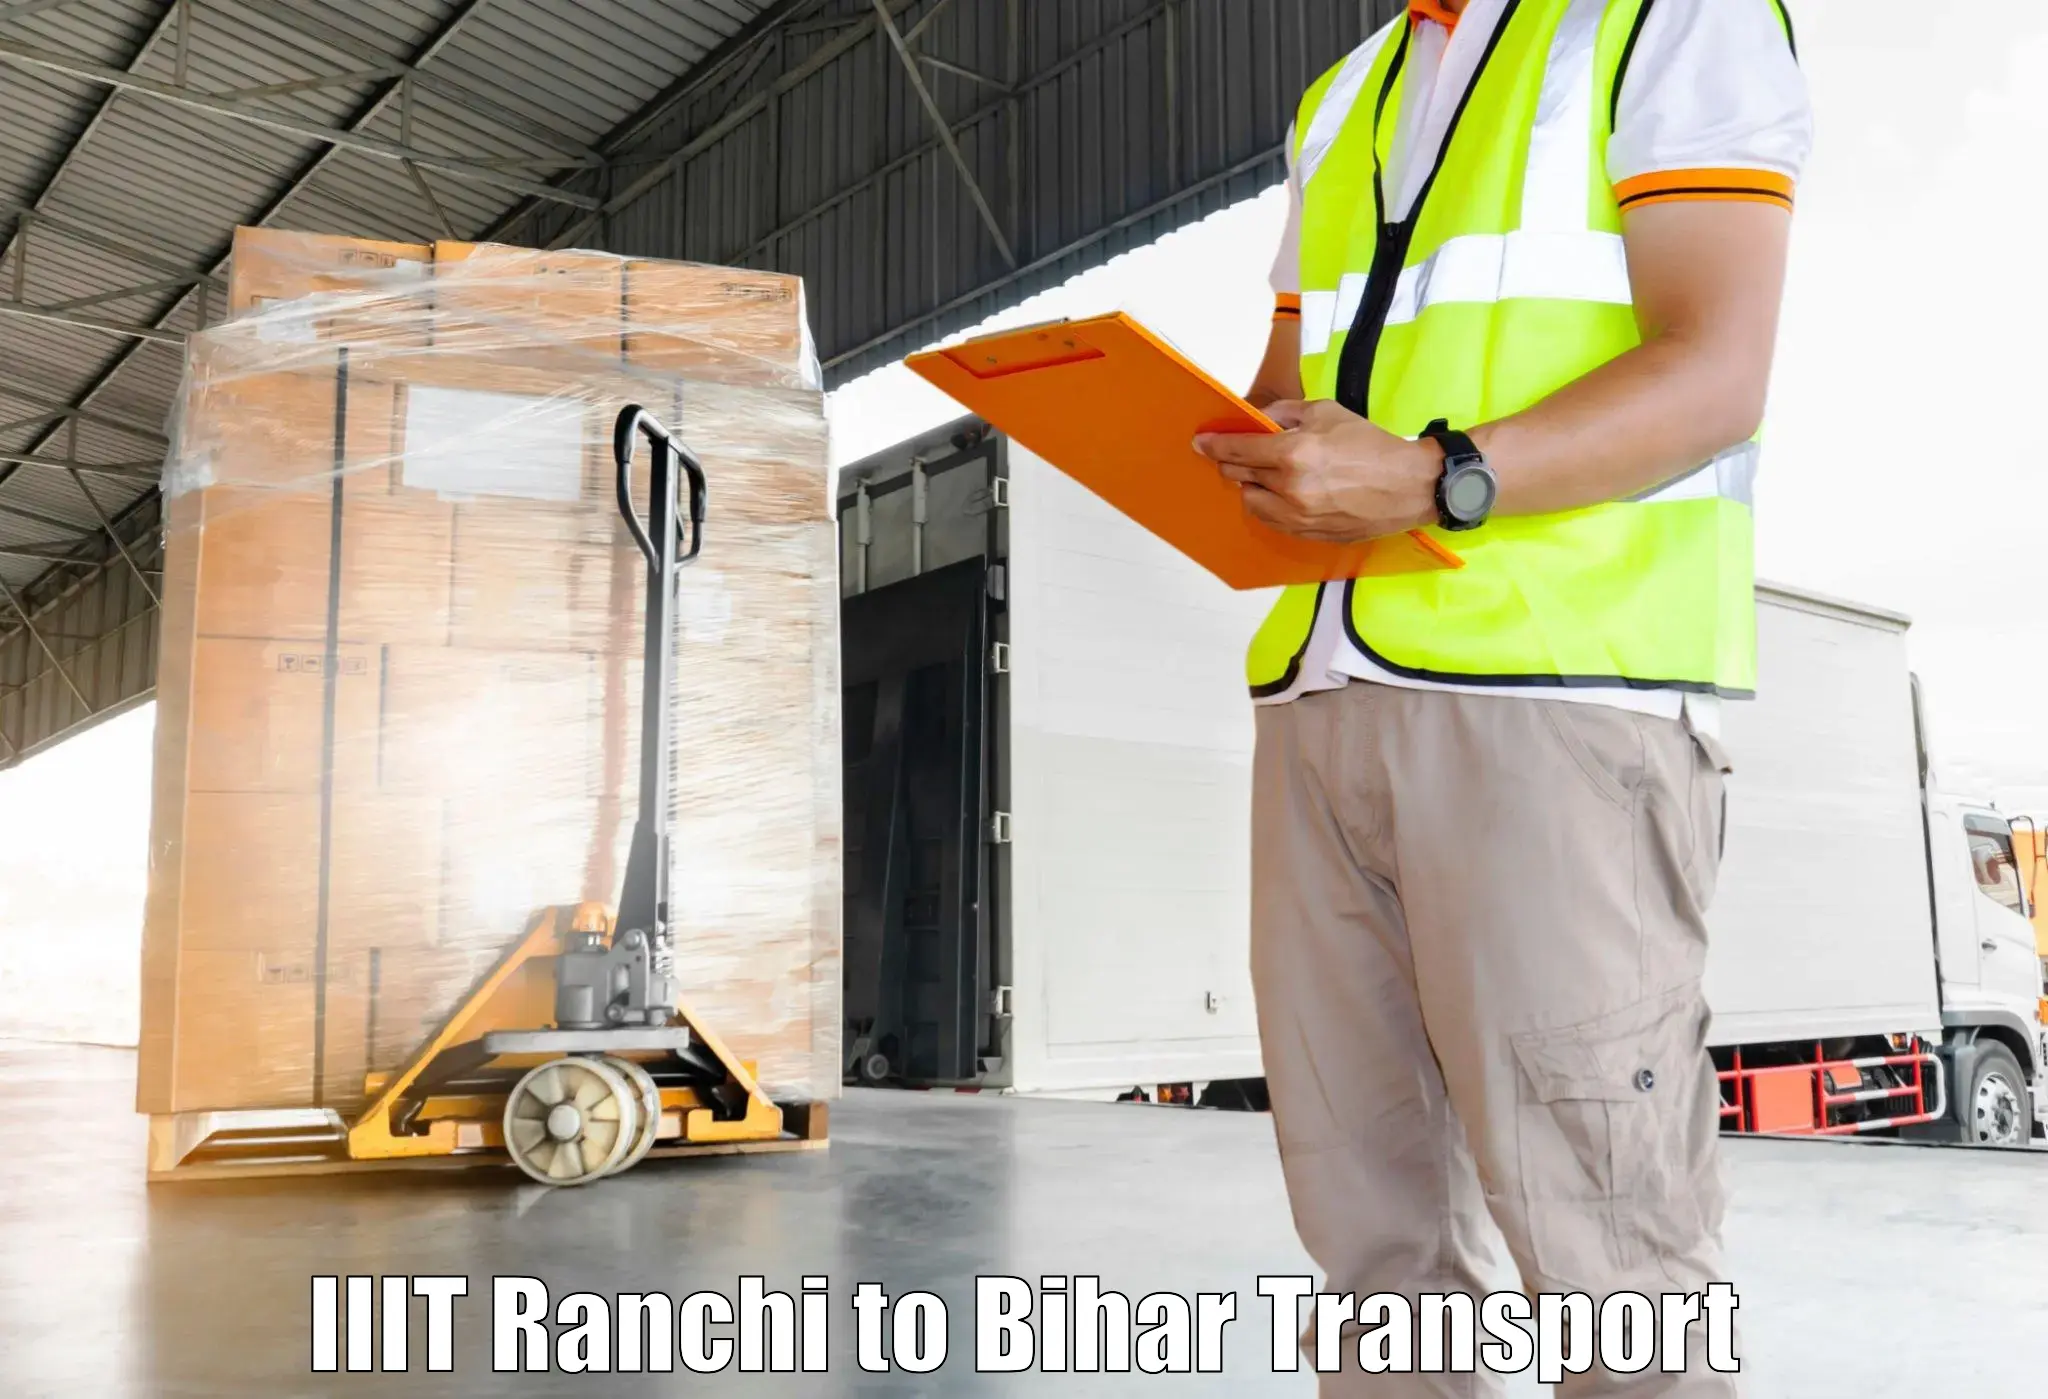 Two wheeler parcel service IIIT Ranchi to Patna